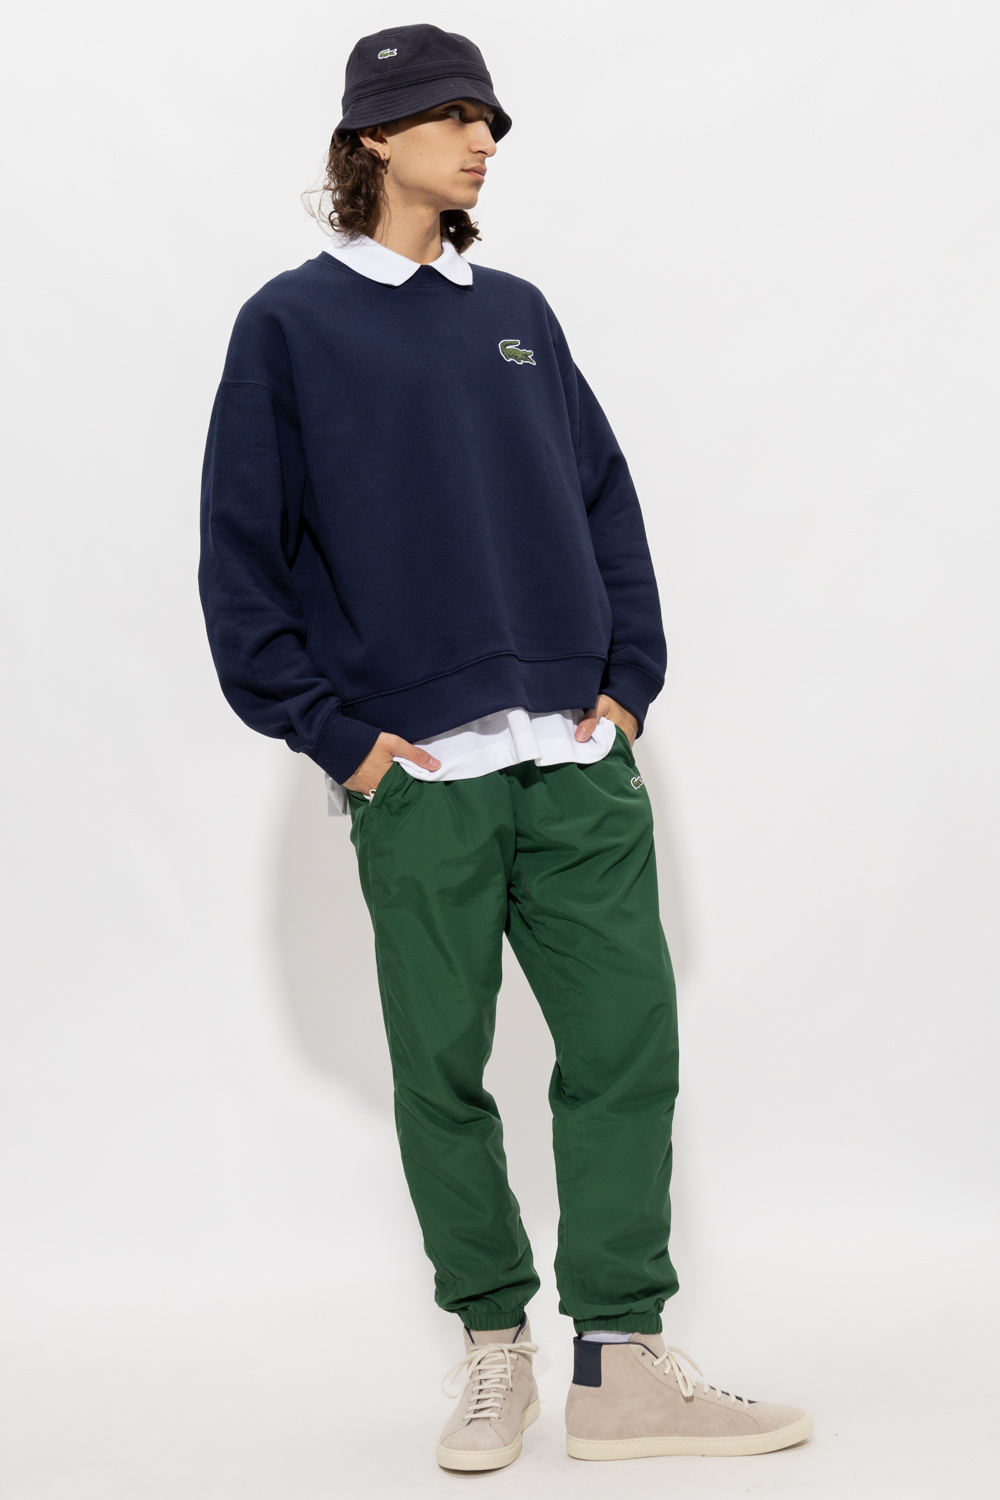 wht carnaby 43suj0004 nvy GenesinlifeShops evo - trainers Navy Sweatshirt 7 patch with 0722 4 lacoste suj - blue Lacoste Canada logo